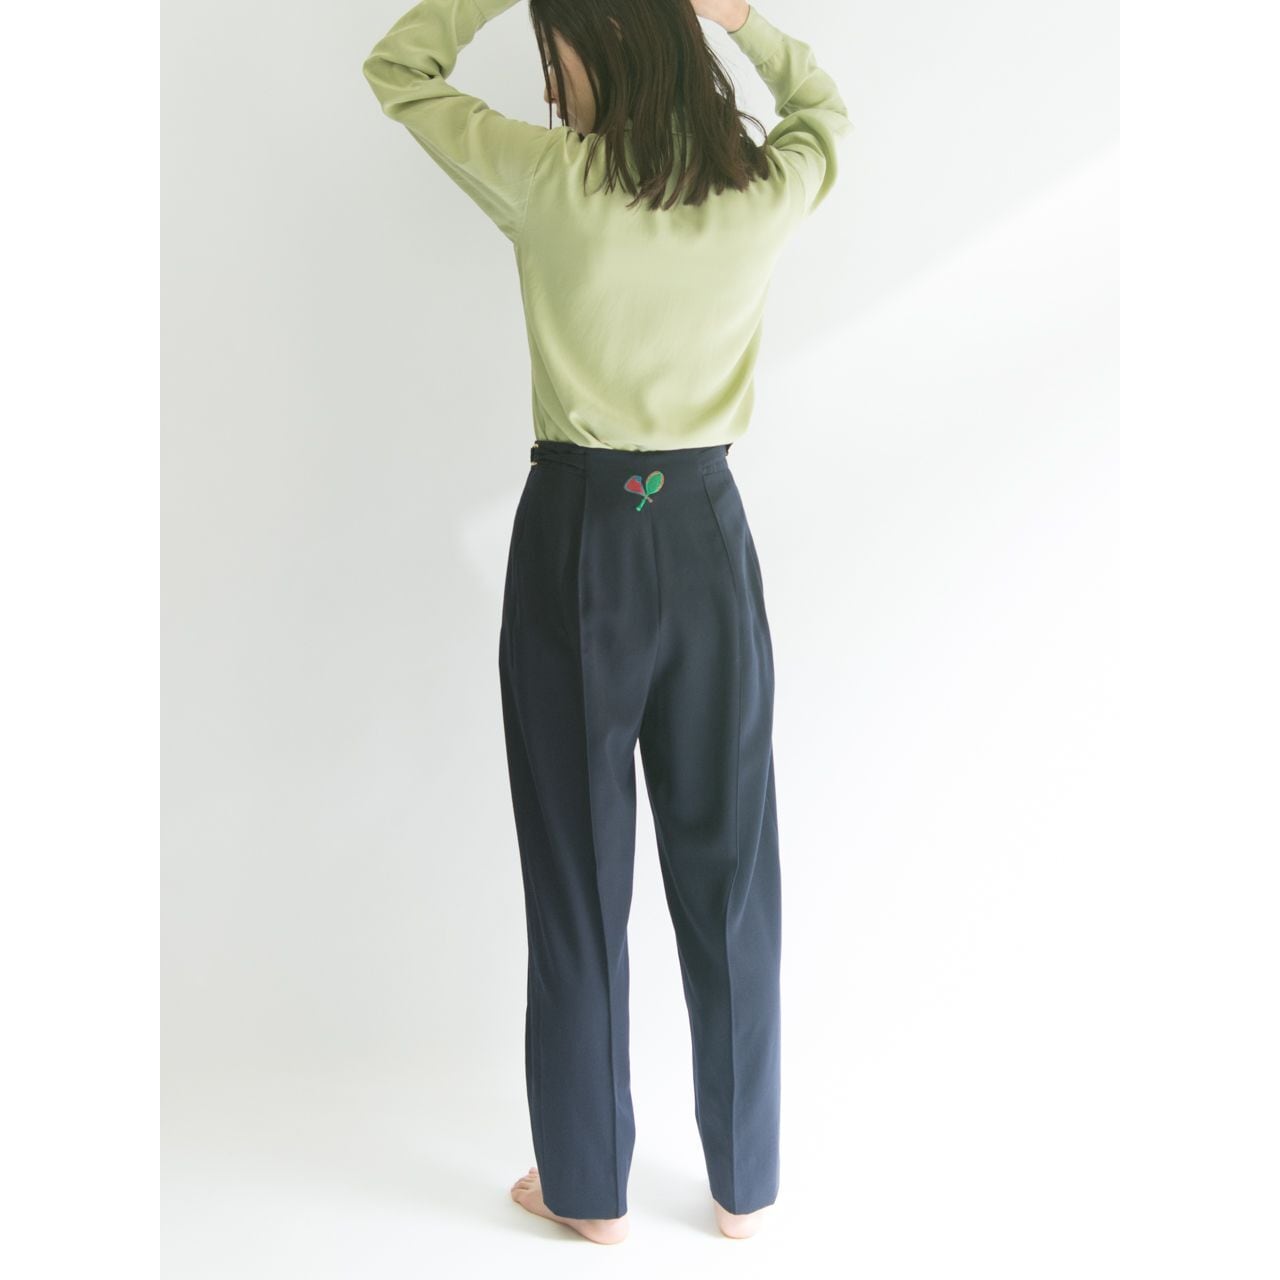 Les Copains】Made in Italy high waist wool trousers pants ...